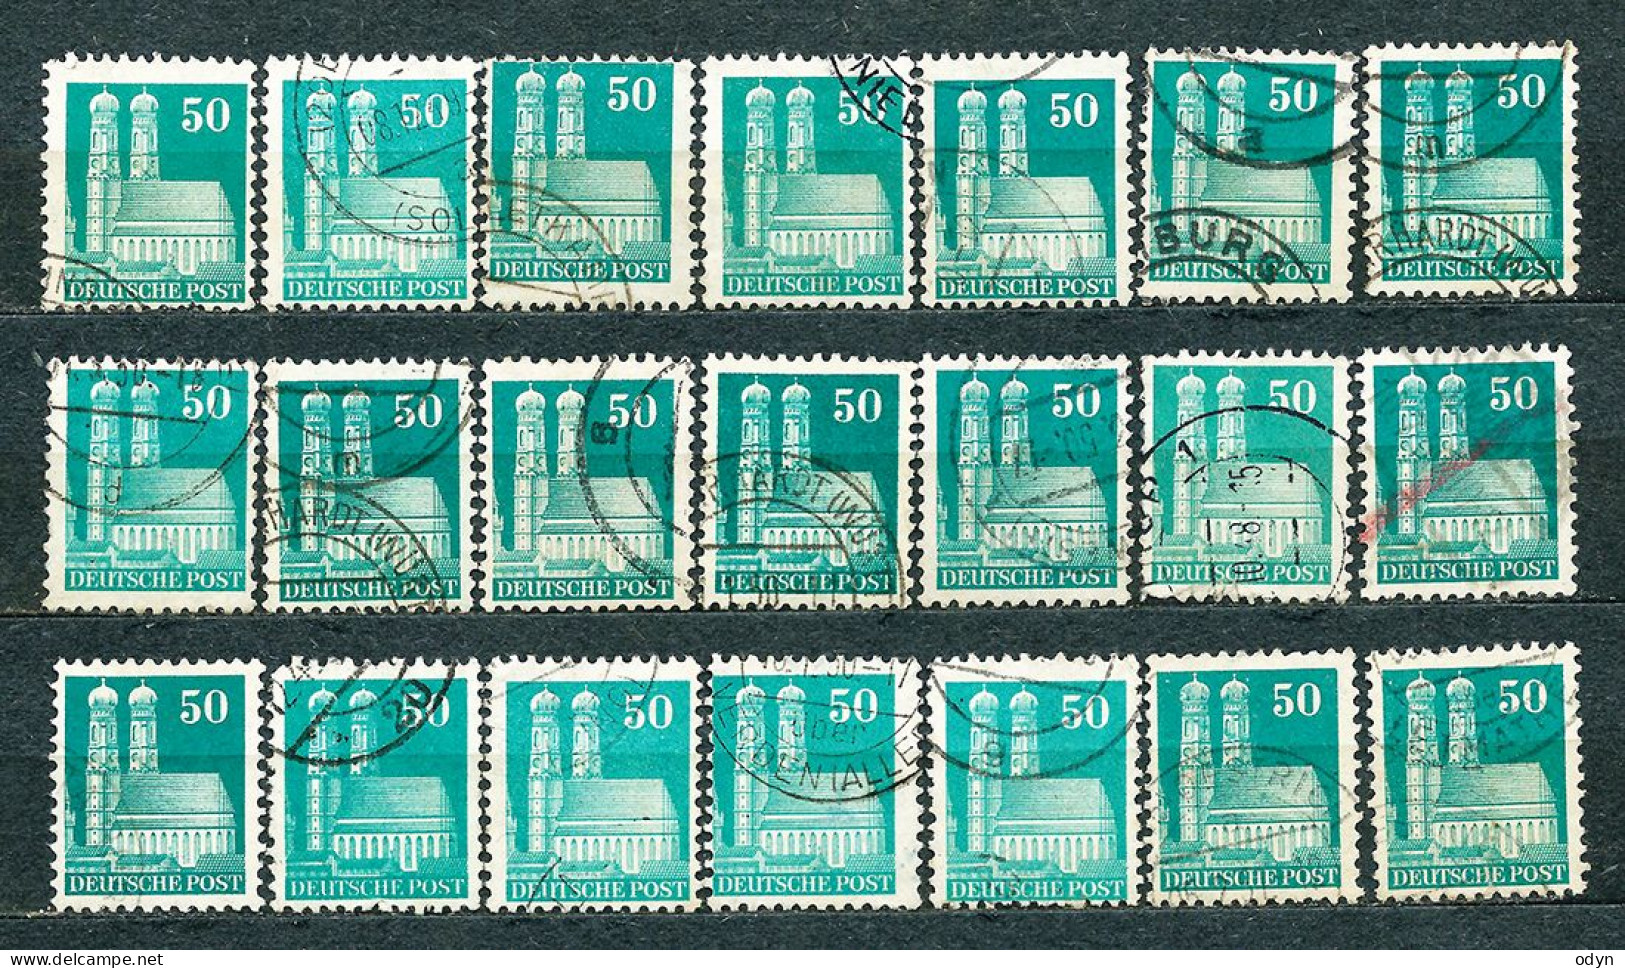 Germany, Am/Brit Zone 1948, lot of 188 stamps from set MiNr 73 wg - 100 wg incl. MiNr 100 I wg - used